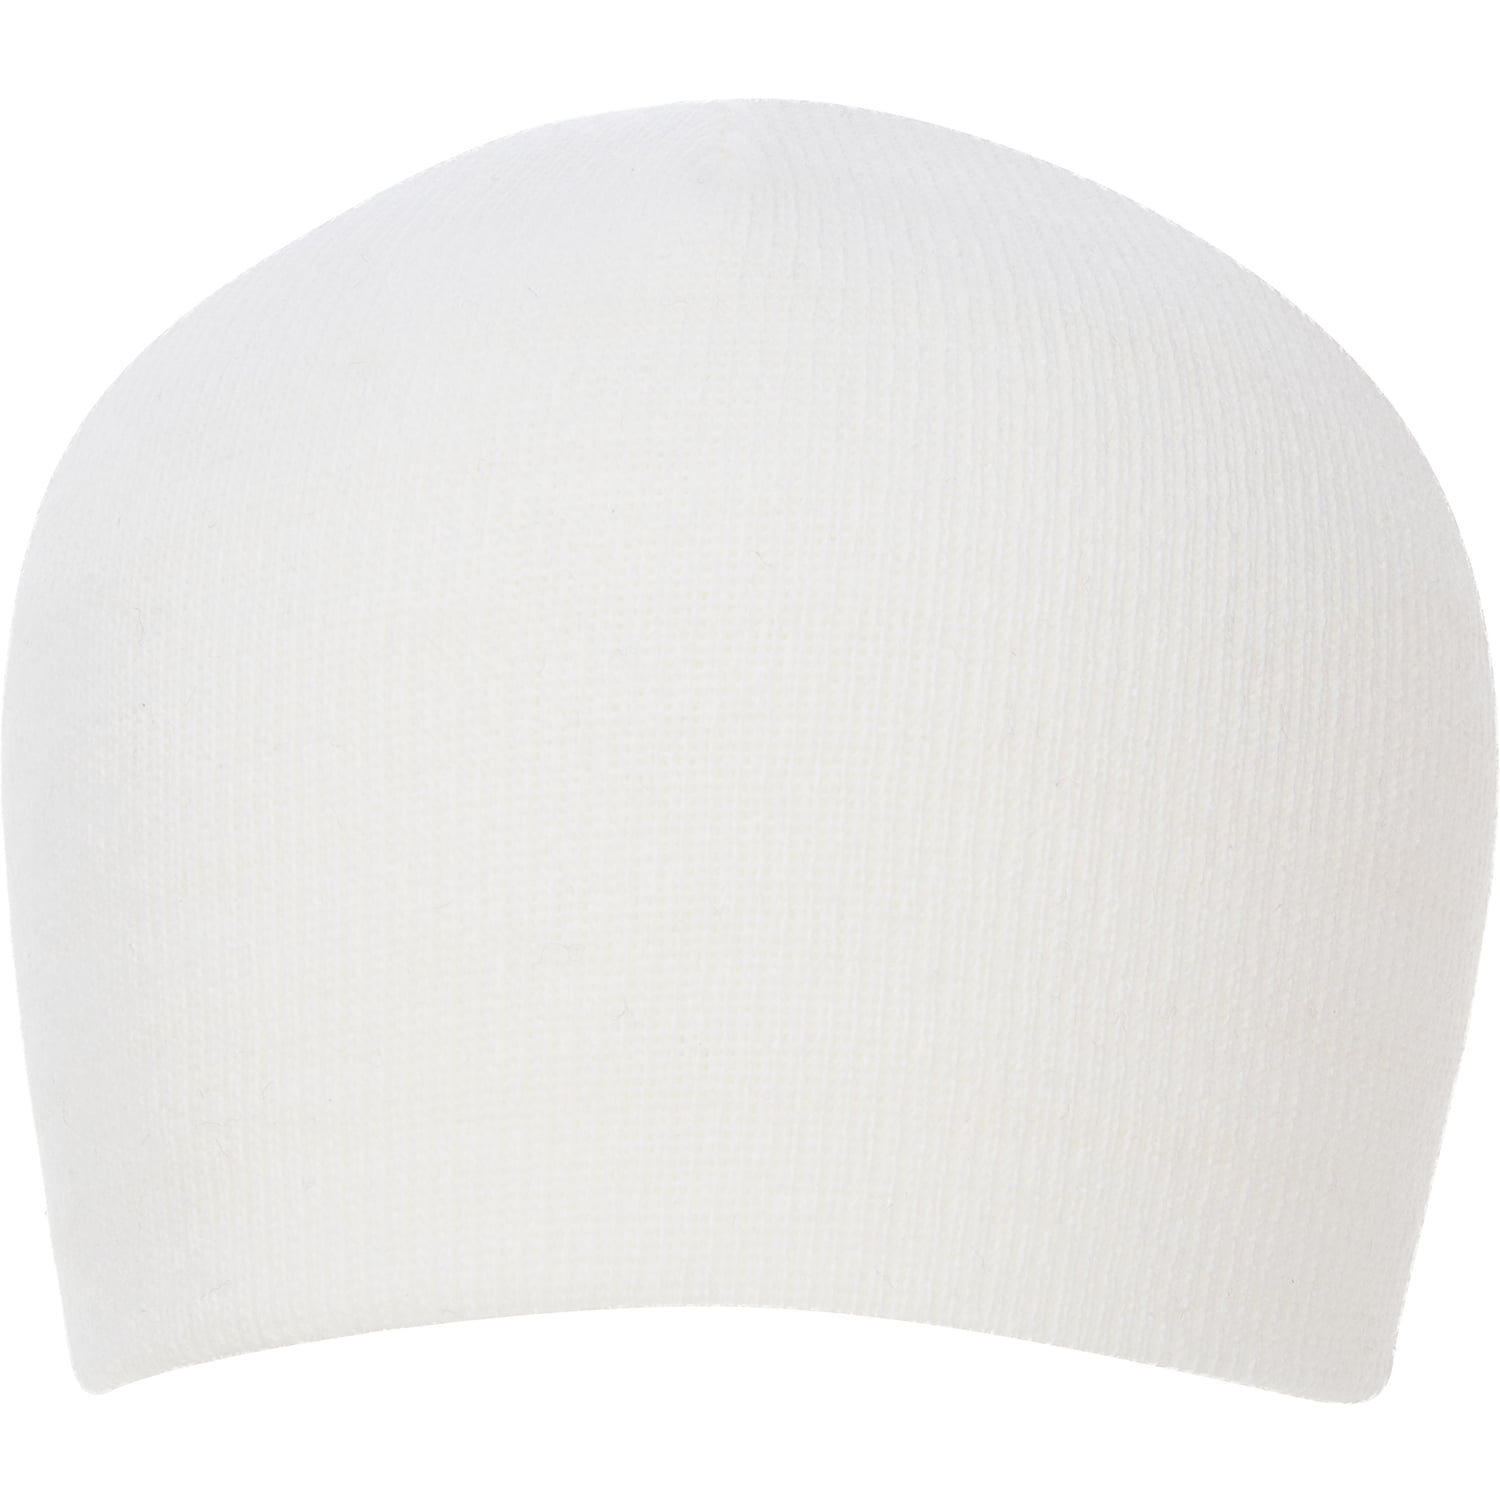 1pc Solid White Beanie Winter Knit Hat - Made in USA - Single Piece